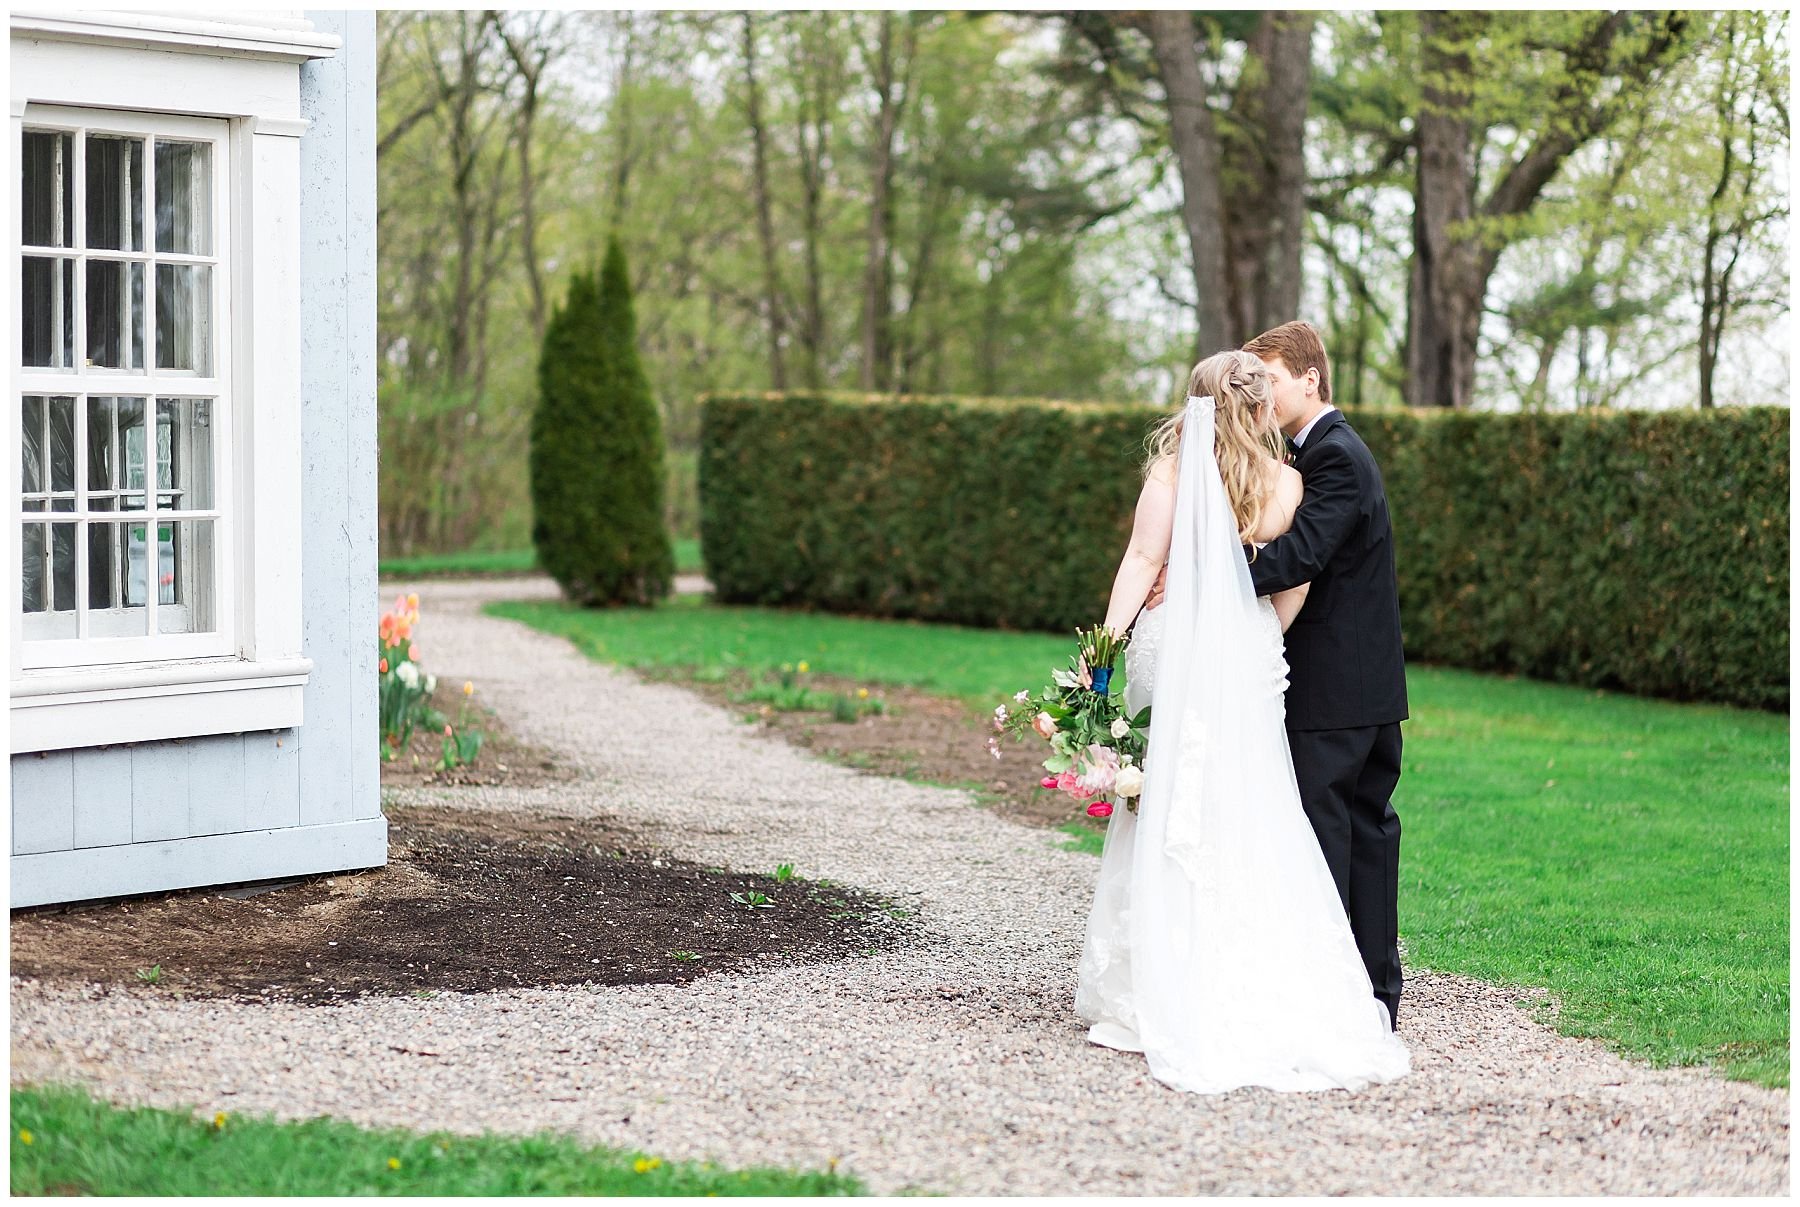 French castle wedding at Chateau Montebello